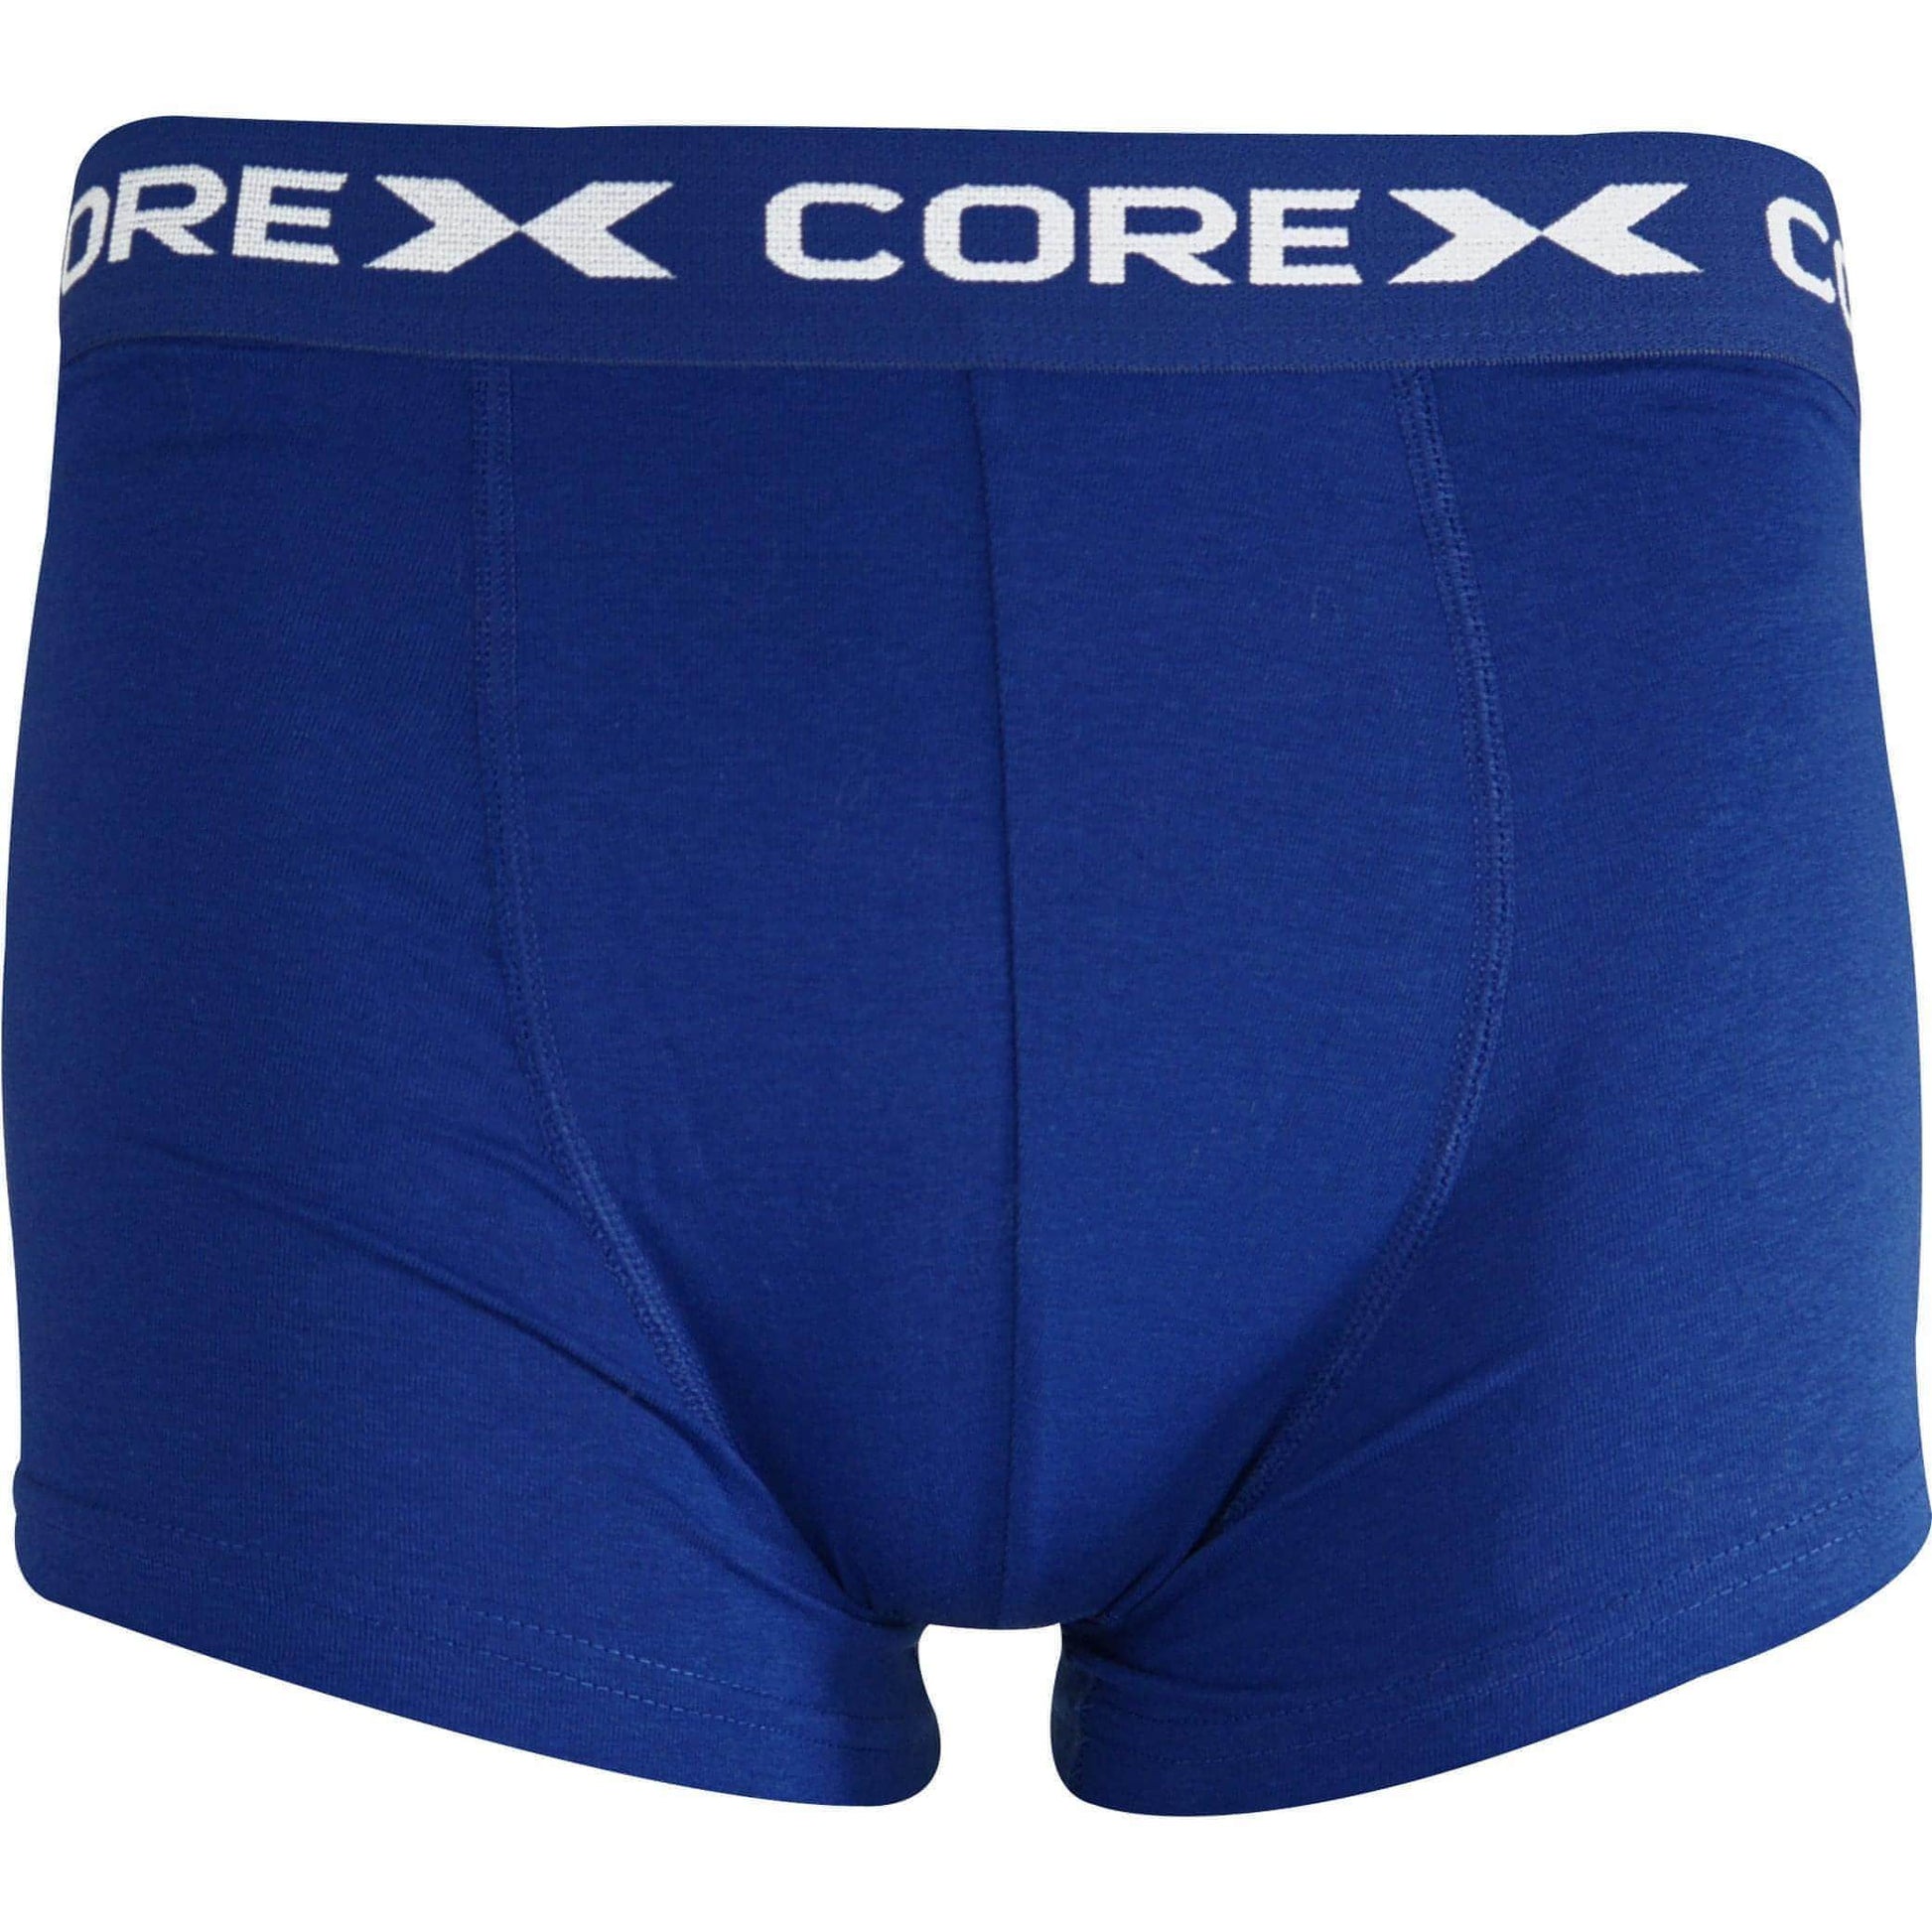 Corex Fitness Classic Pack Boxers 1P204931Wm Royalgrey Royal Front - Front View